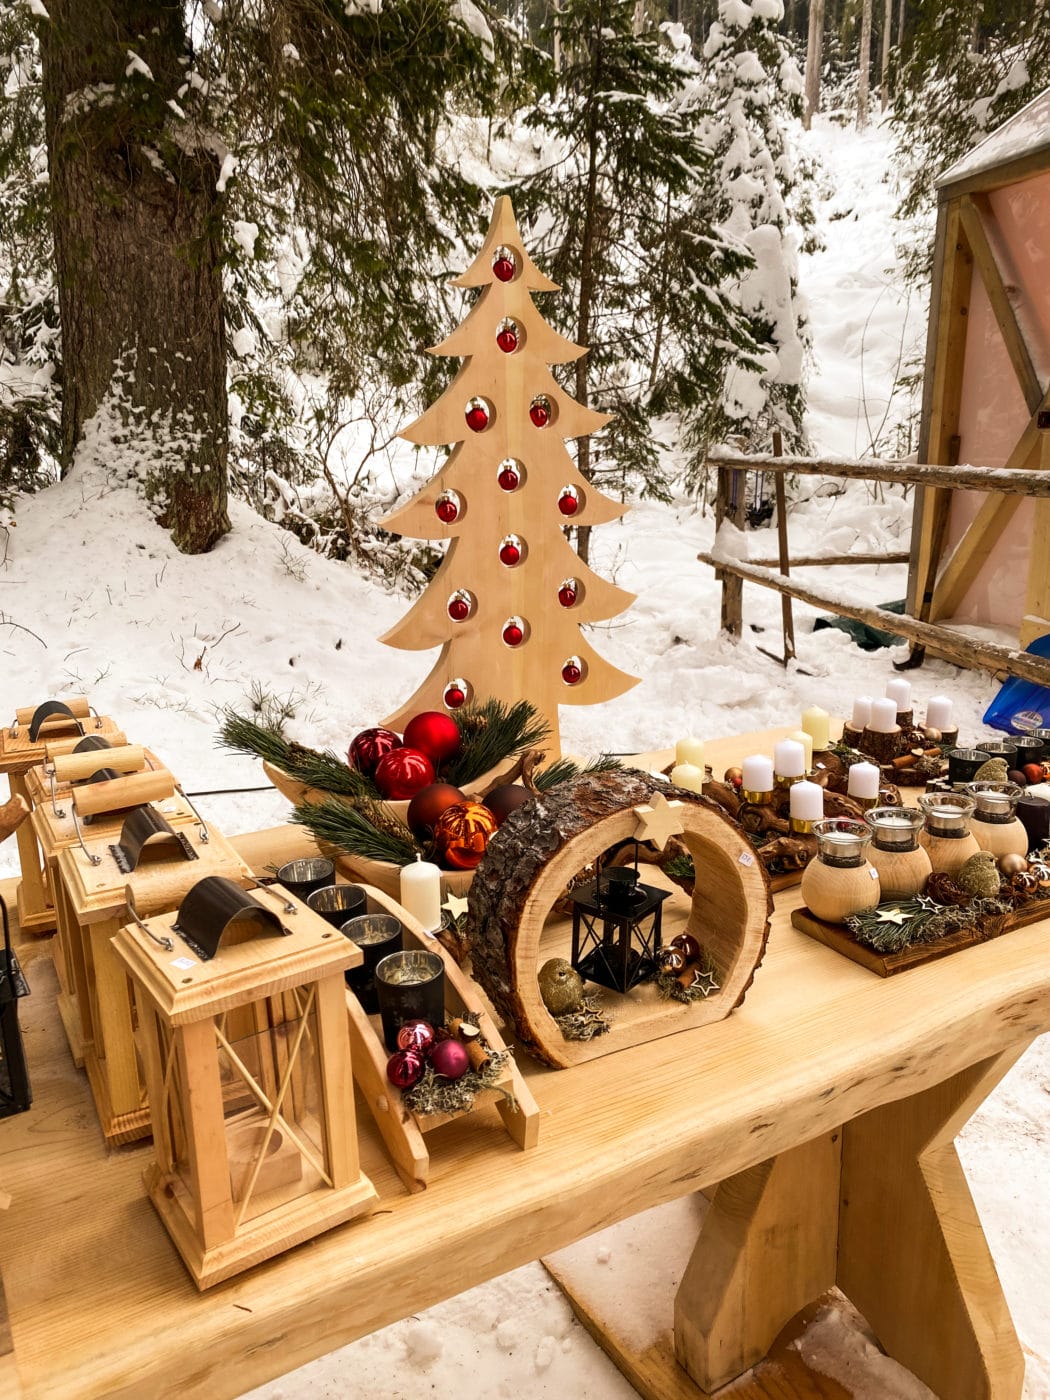 handcrafted wooden sculptures for sale at a christmas market in the dolomites